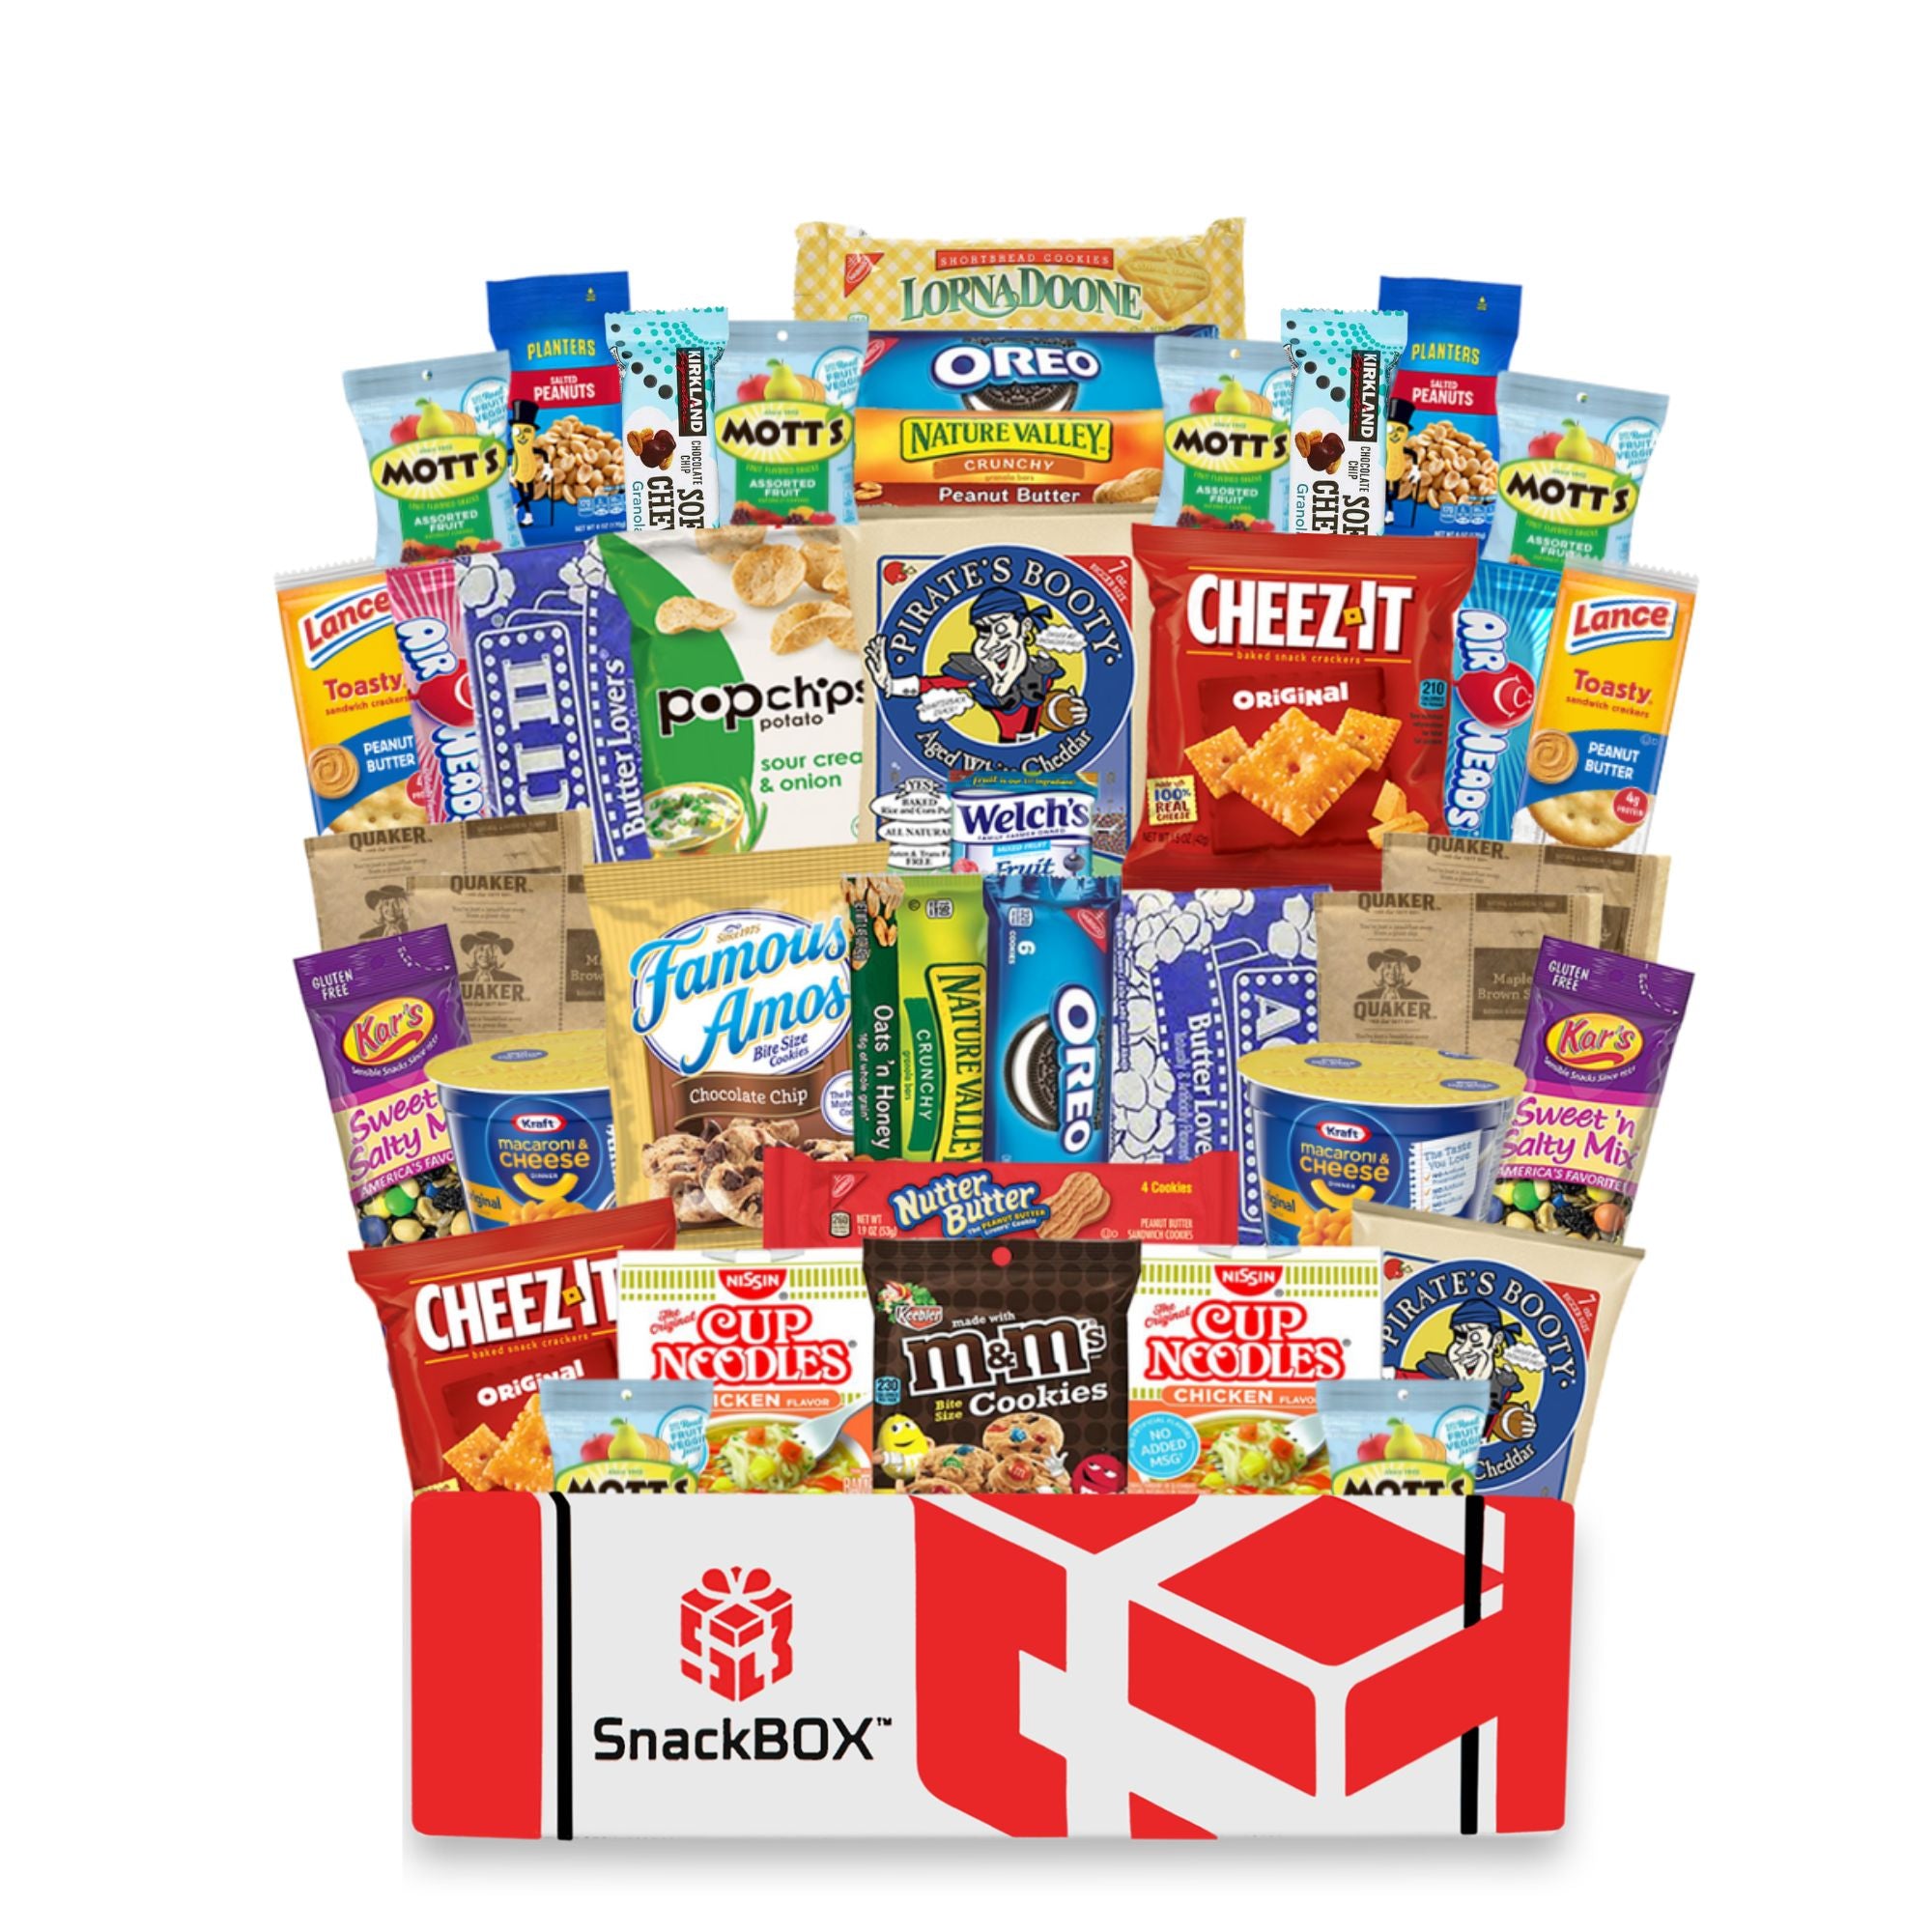 Snack Box Care Package (120 Count) Variety Snacks valentines day Gift Box -  College Students,Back to school Military, Work or Home - Chips Cookies 